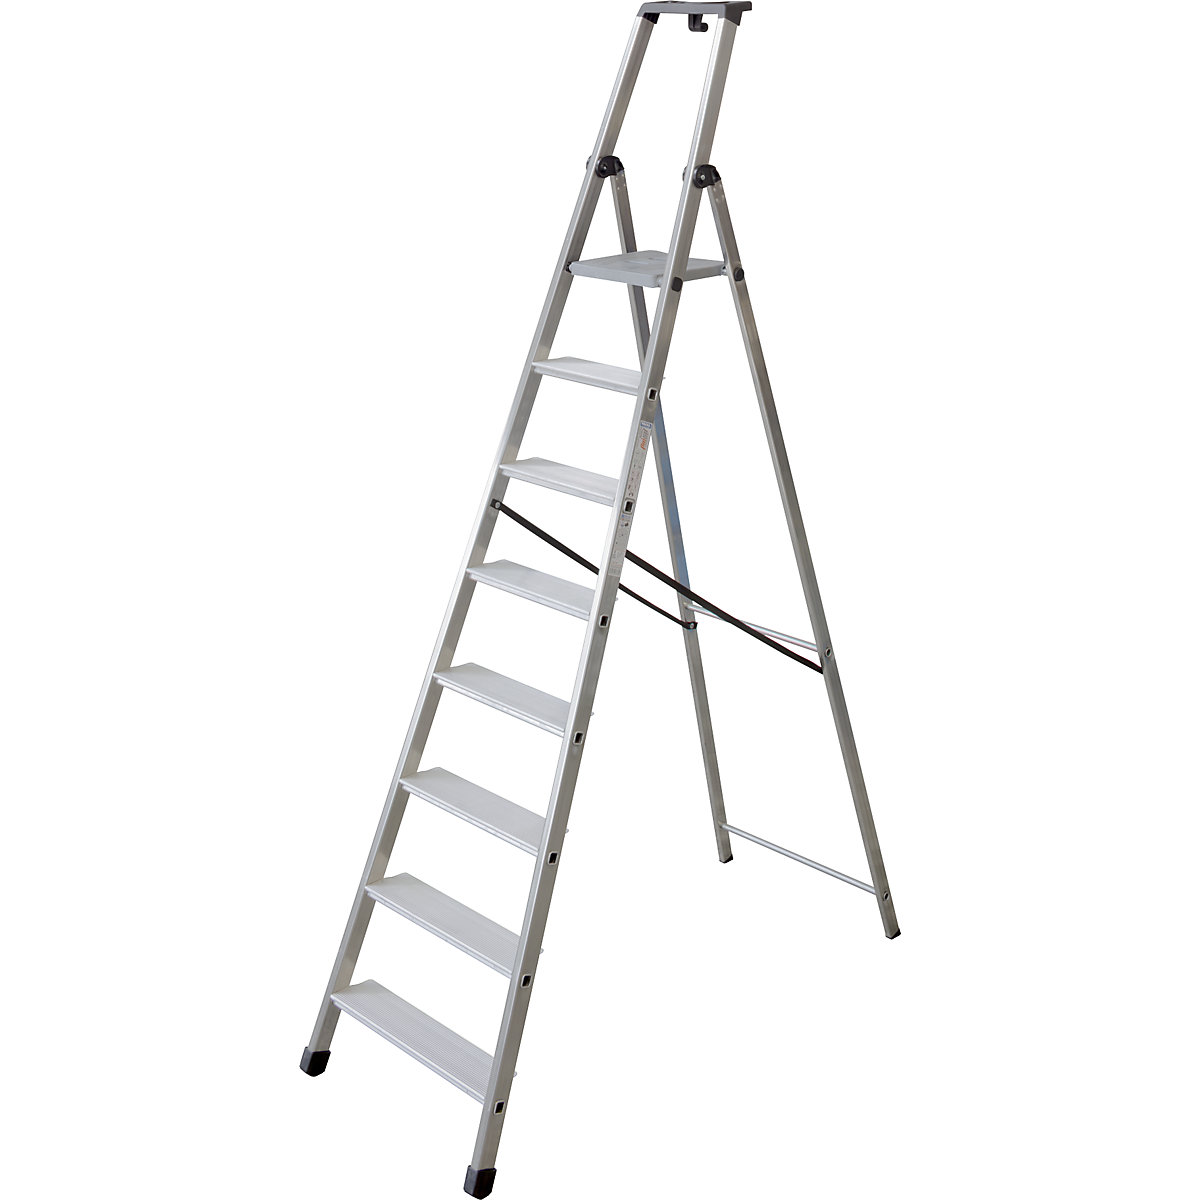 Step ladder, single sided access with extra deep steps, 8 steps incl. platform-5